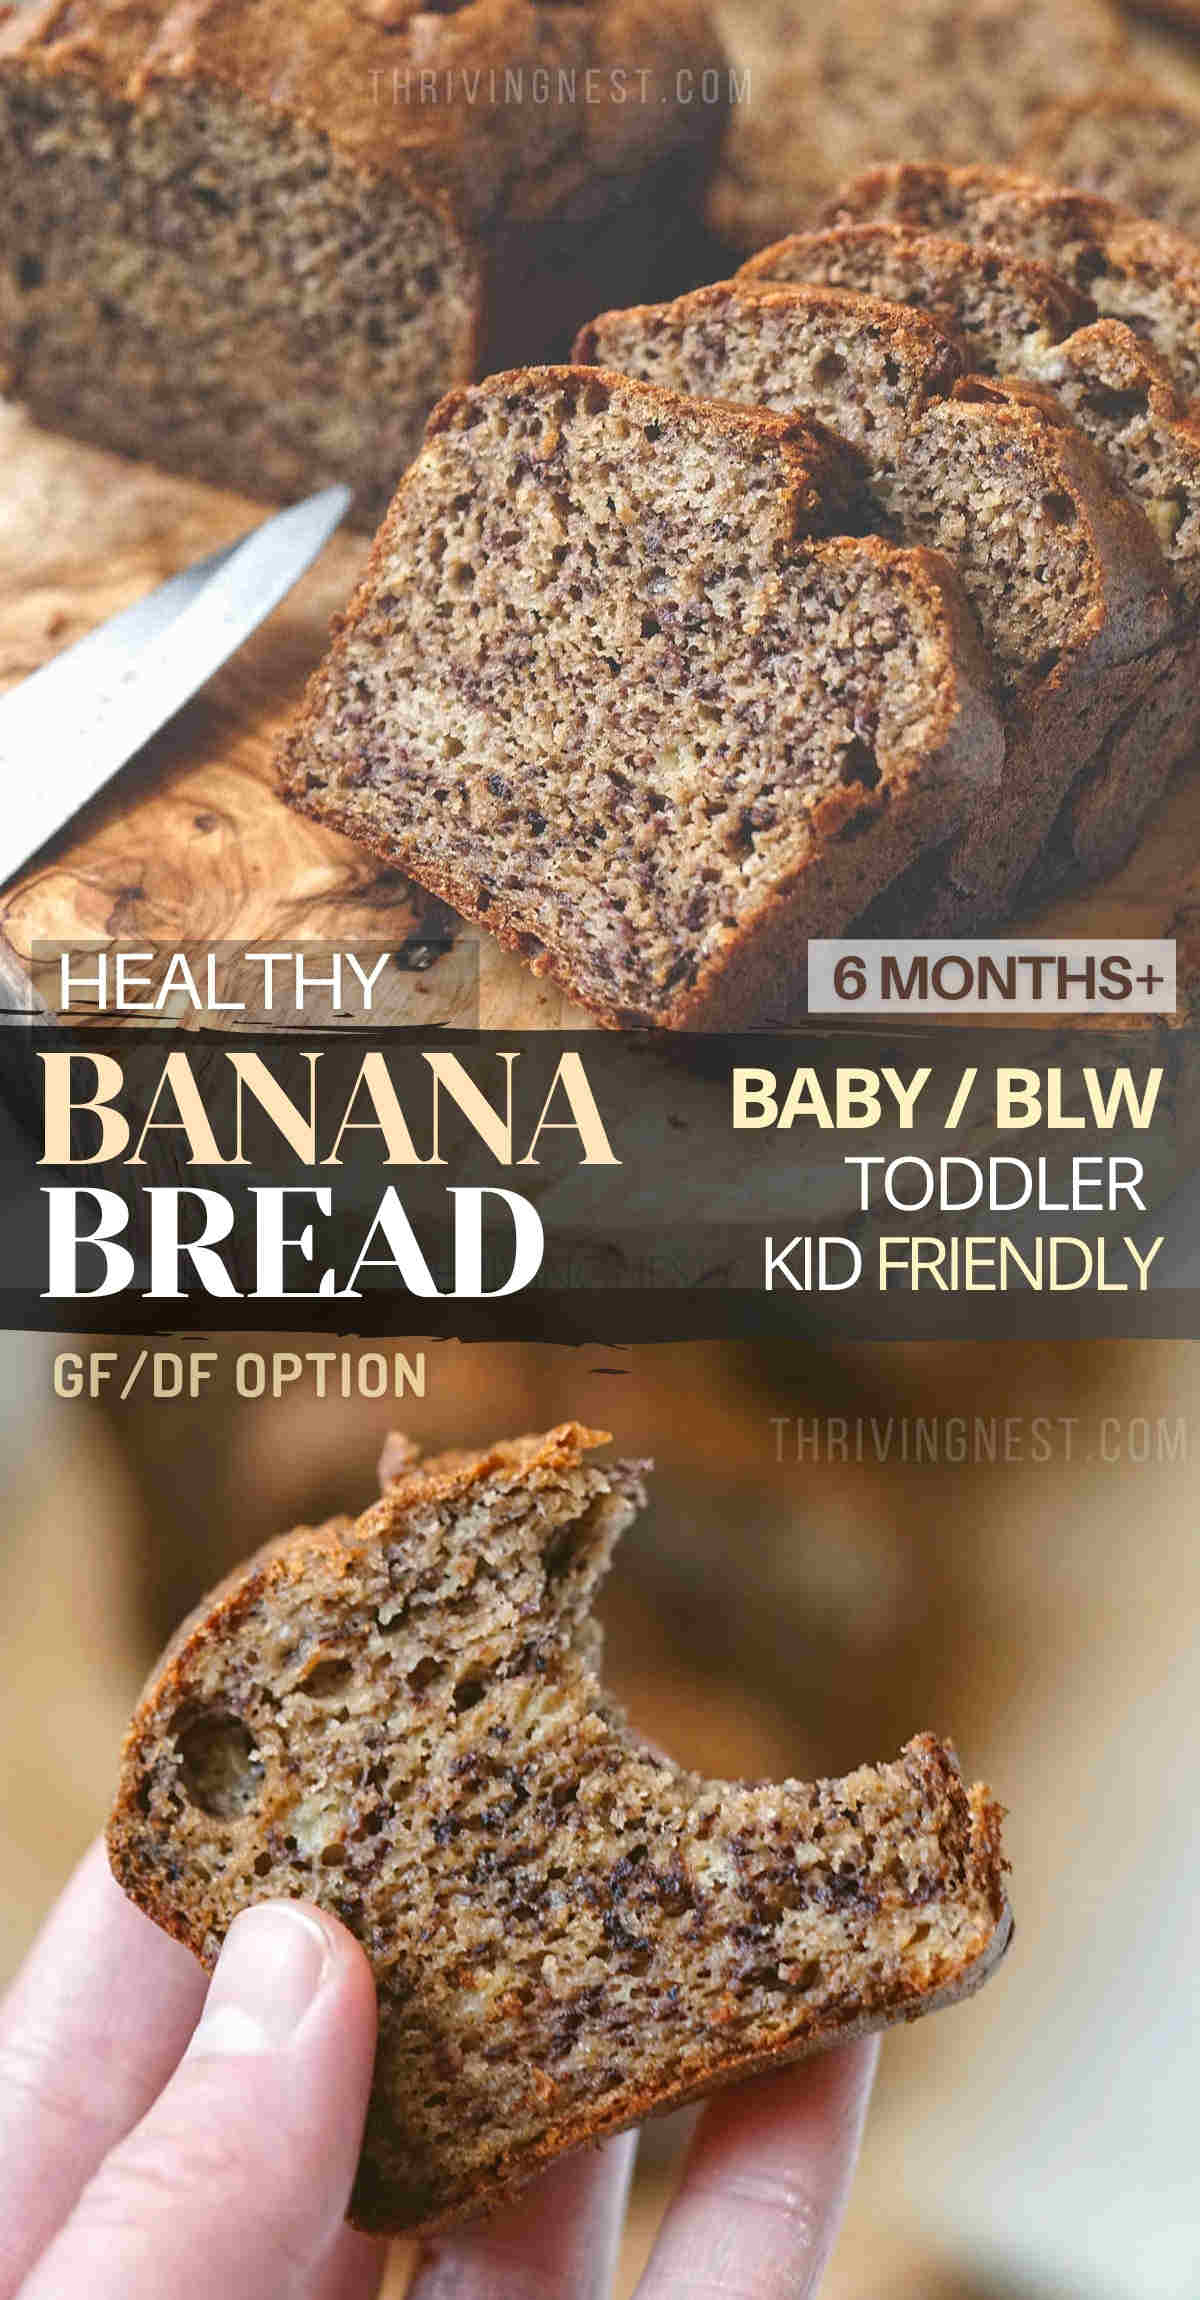 This healthy no sugar banana bread for babies is soft, moist with a light fluffy texture. You can serve this baby banana bread as an early food for babies (6 months and up), especially when doing baby led weaning. This baby friendly banana bread is intended as snack or dessert for babies, toddlers and older kids, can be customized to be gluten free and dairy free. #bananabreadforbaby #babybananabread #bananabread #babyledweaning #glutenfree #dairyfree #healthybananabread